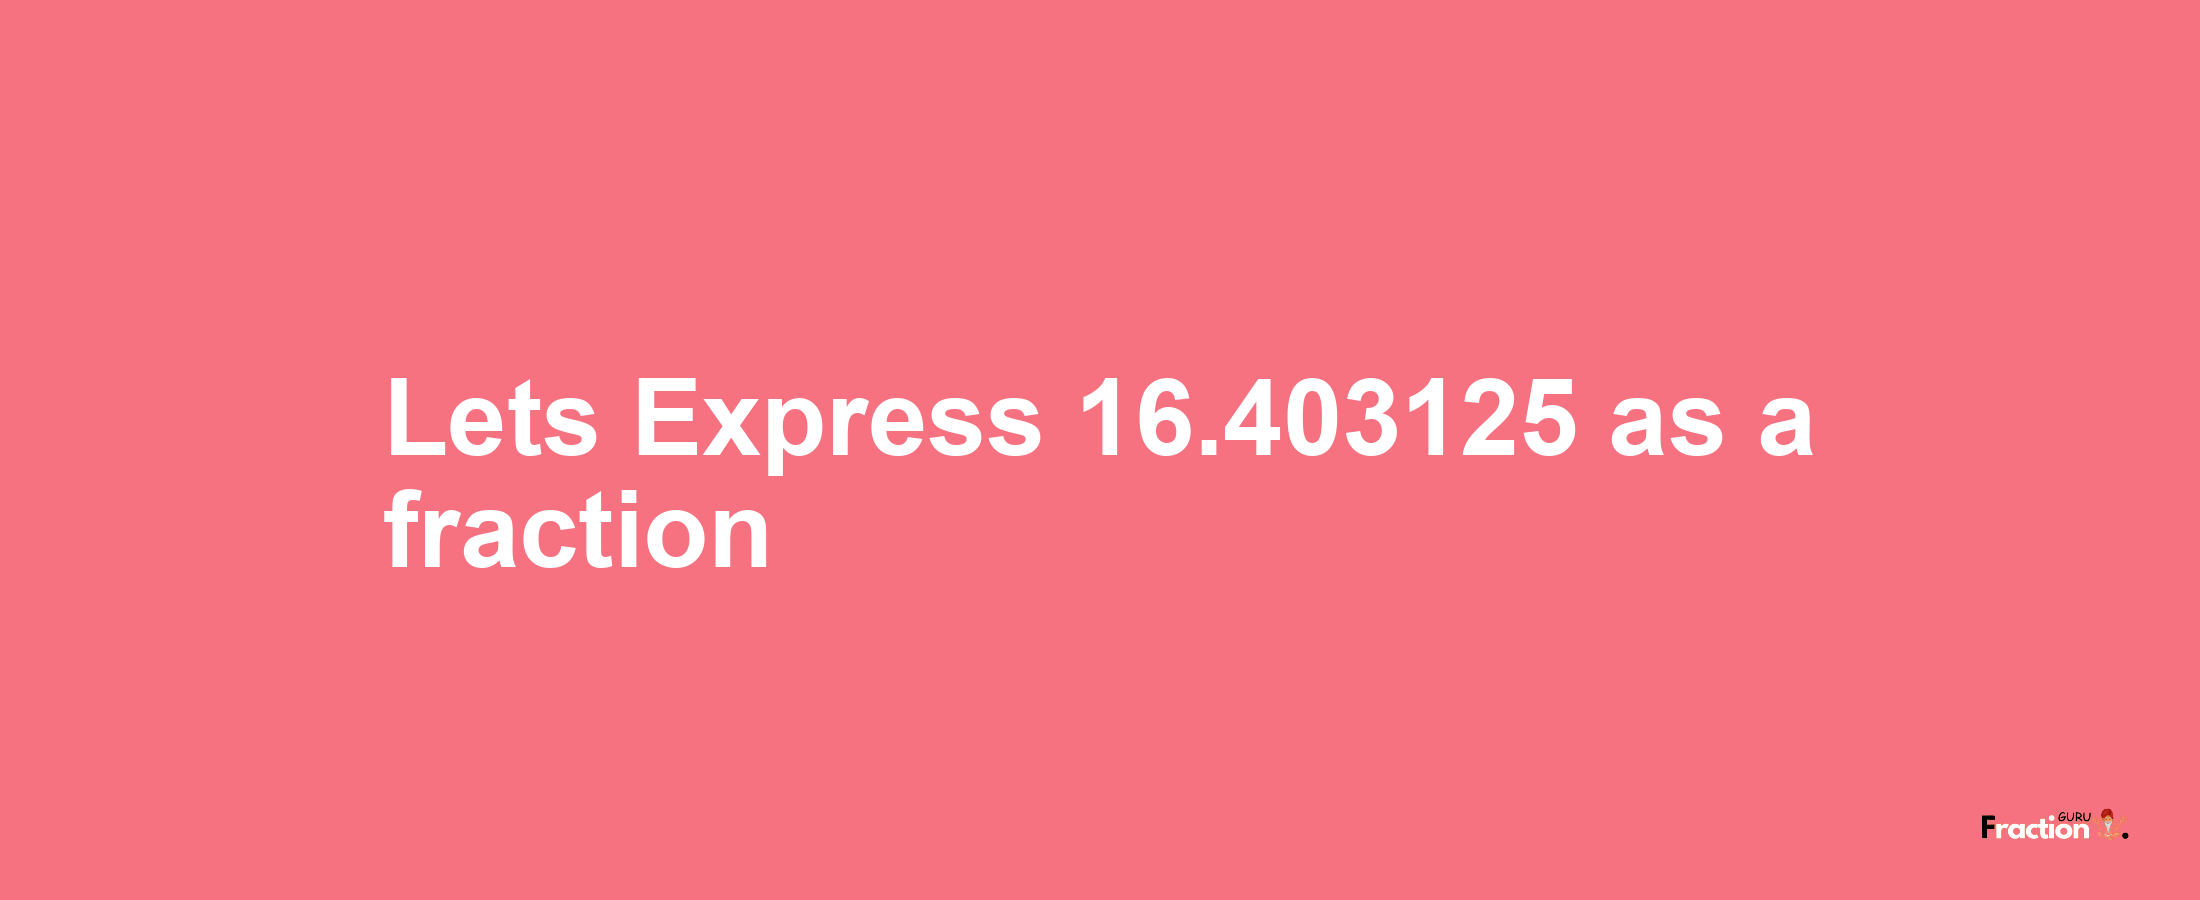 Lets Express 16.403125 as afraction